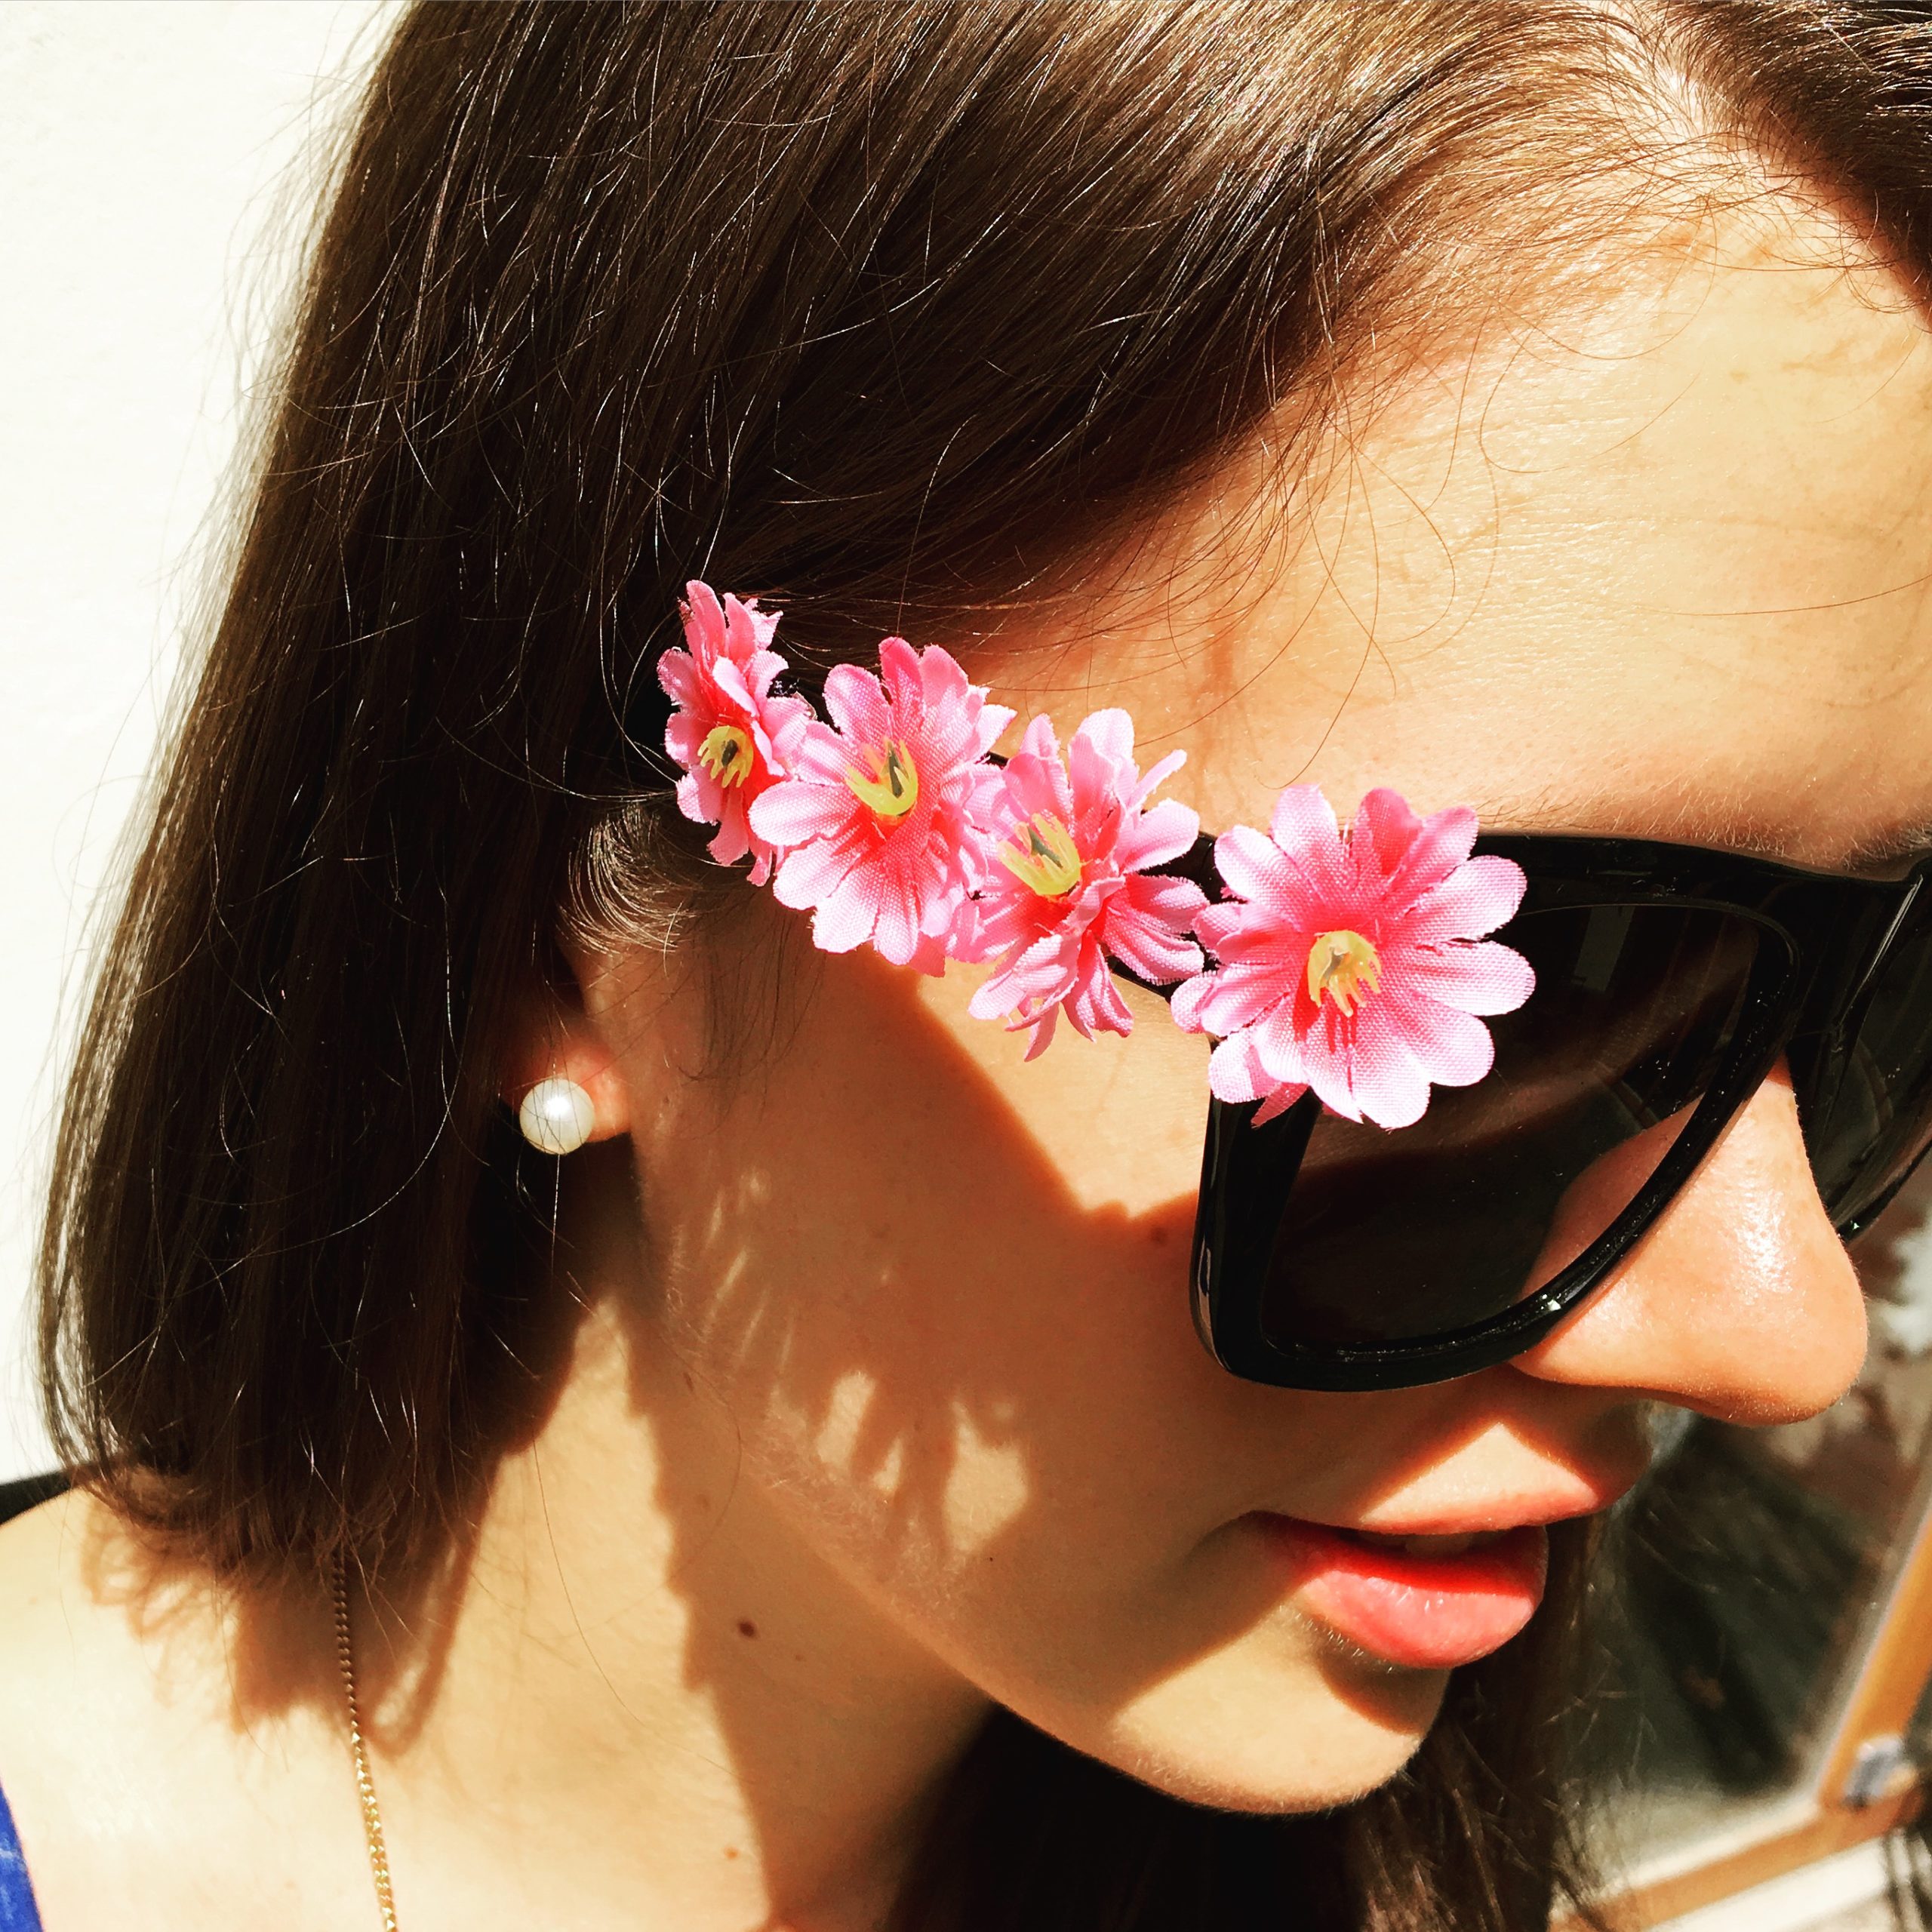 Sunglasses - the must-have for summer l BLOOMY DAYS